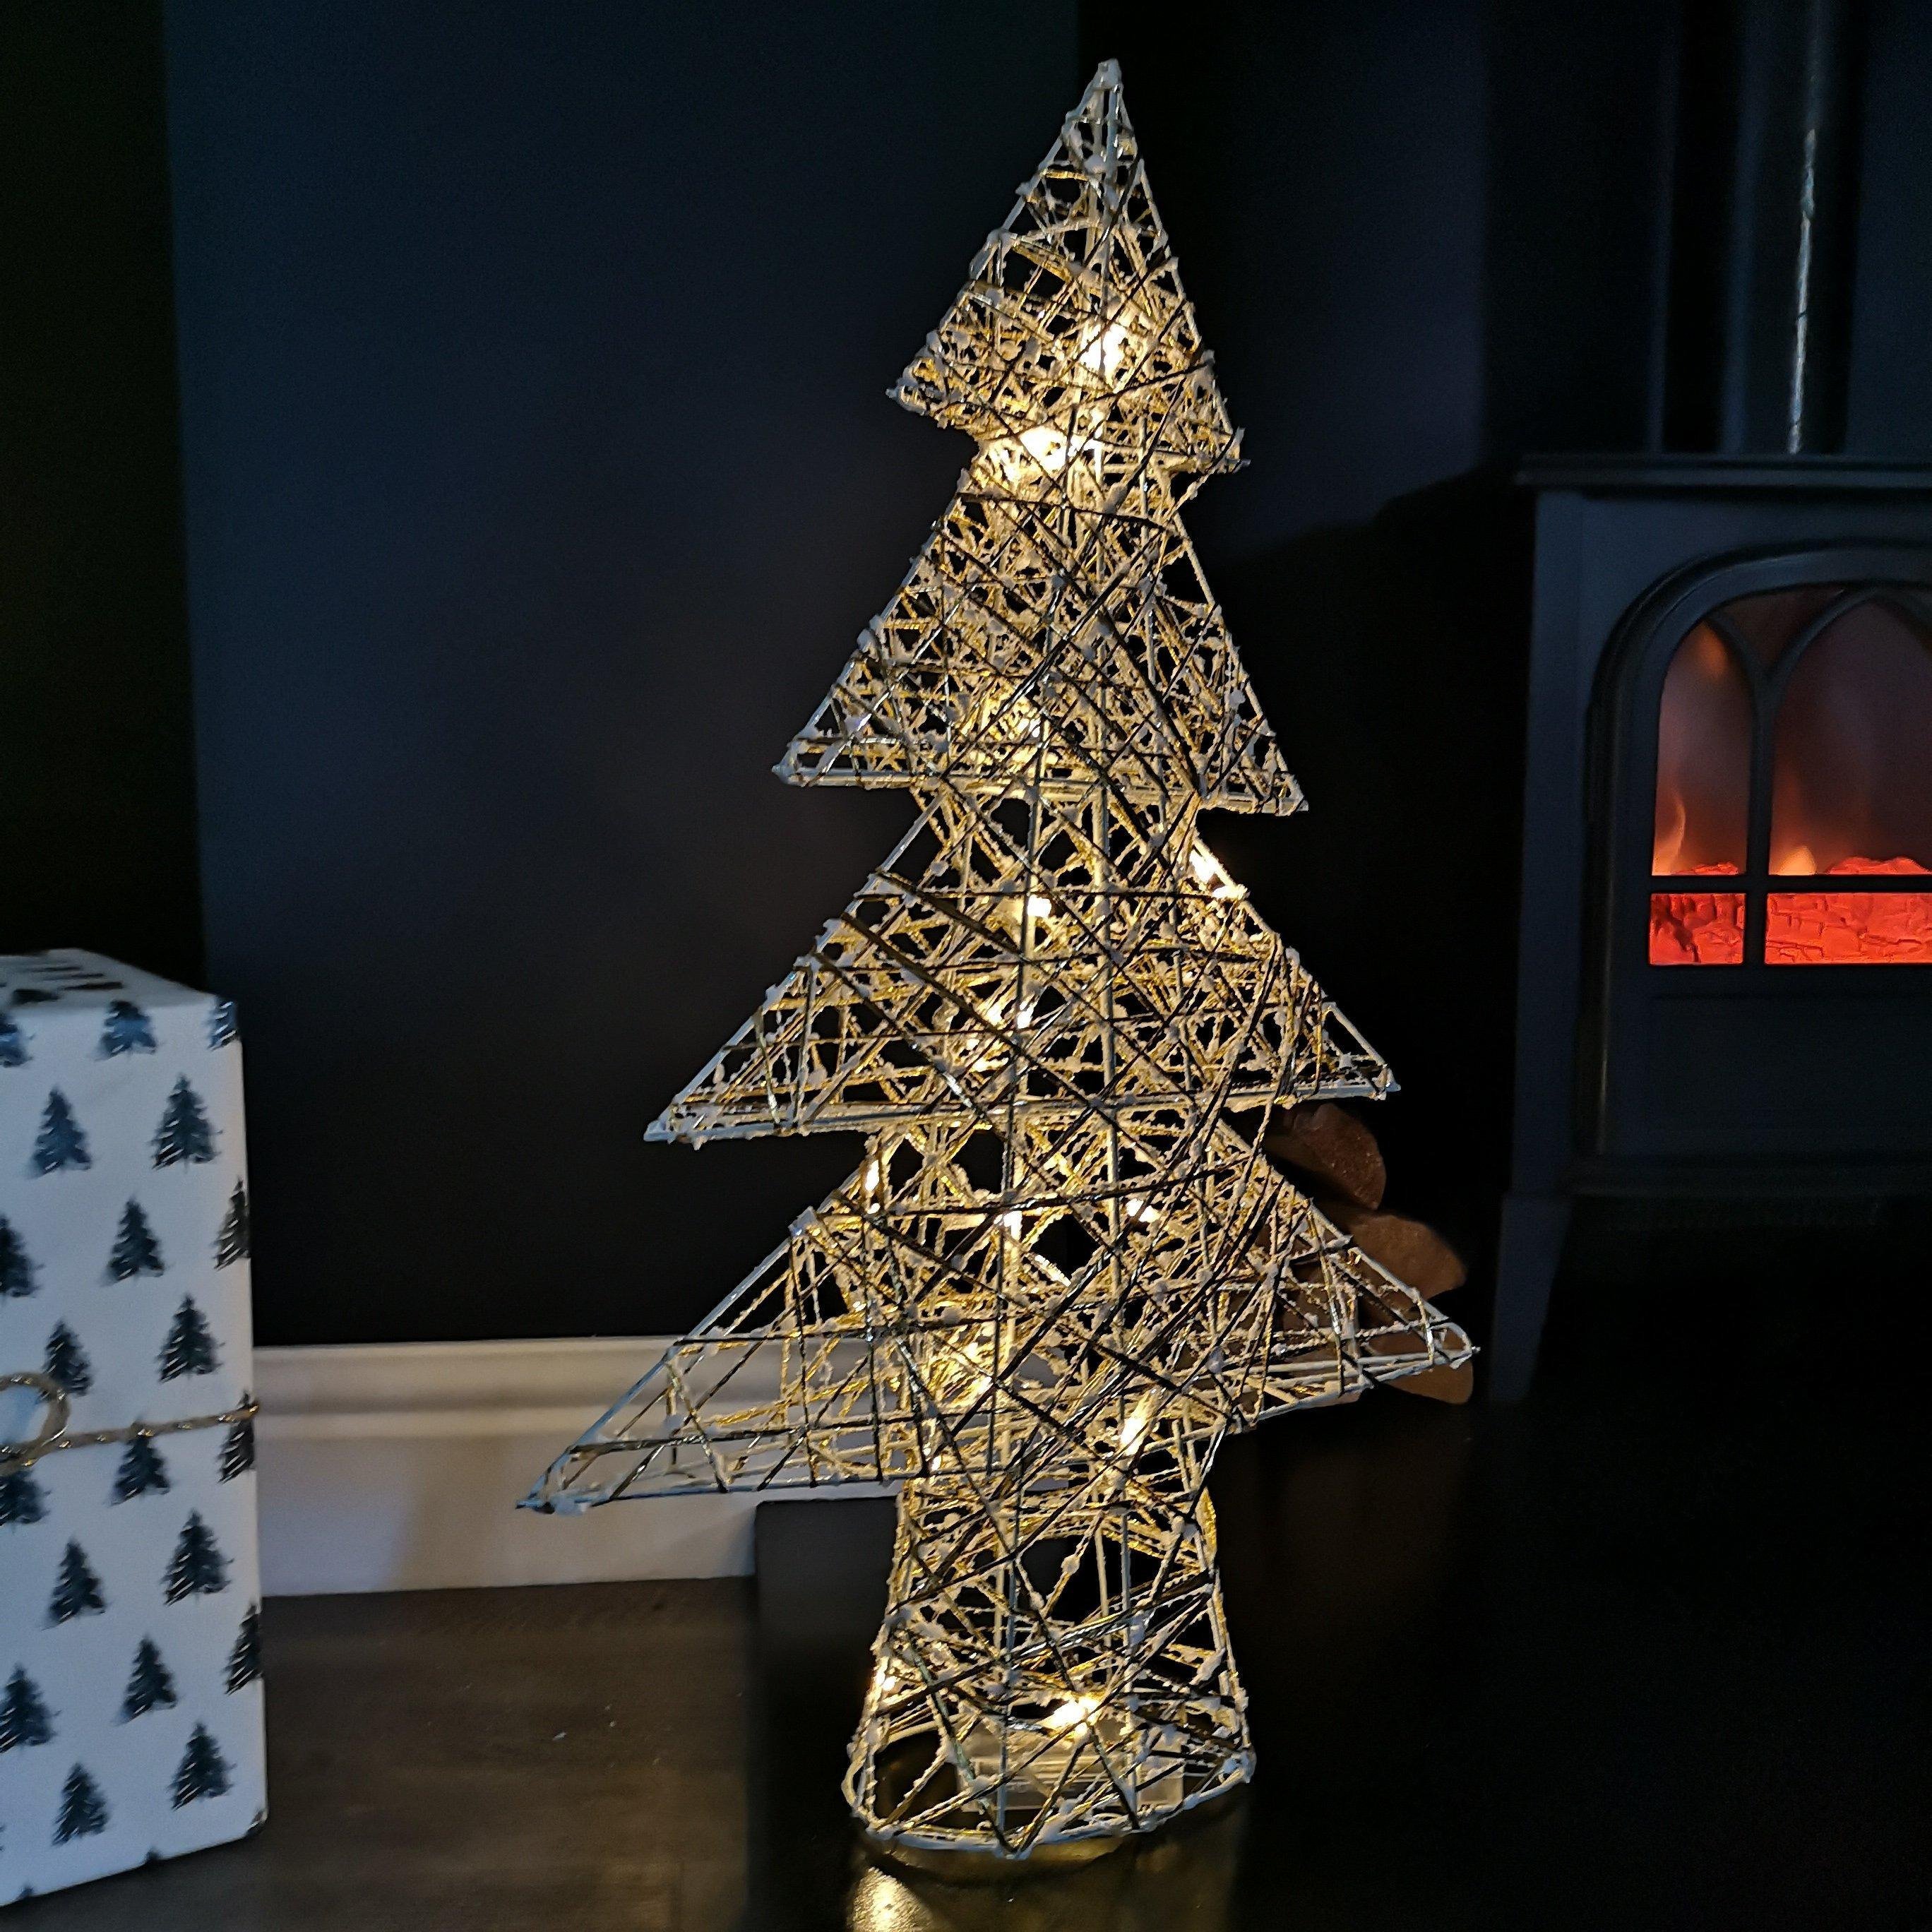 60cm Battery Operated Gold Woven Christmas Tree with White LEDs - image 1